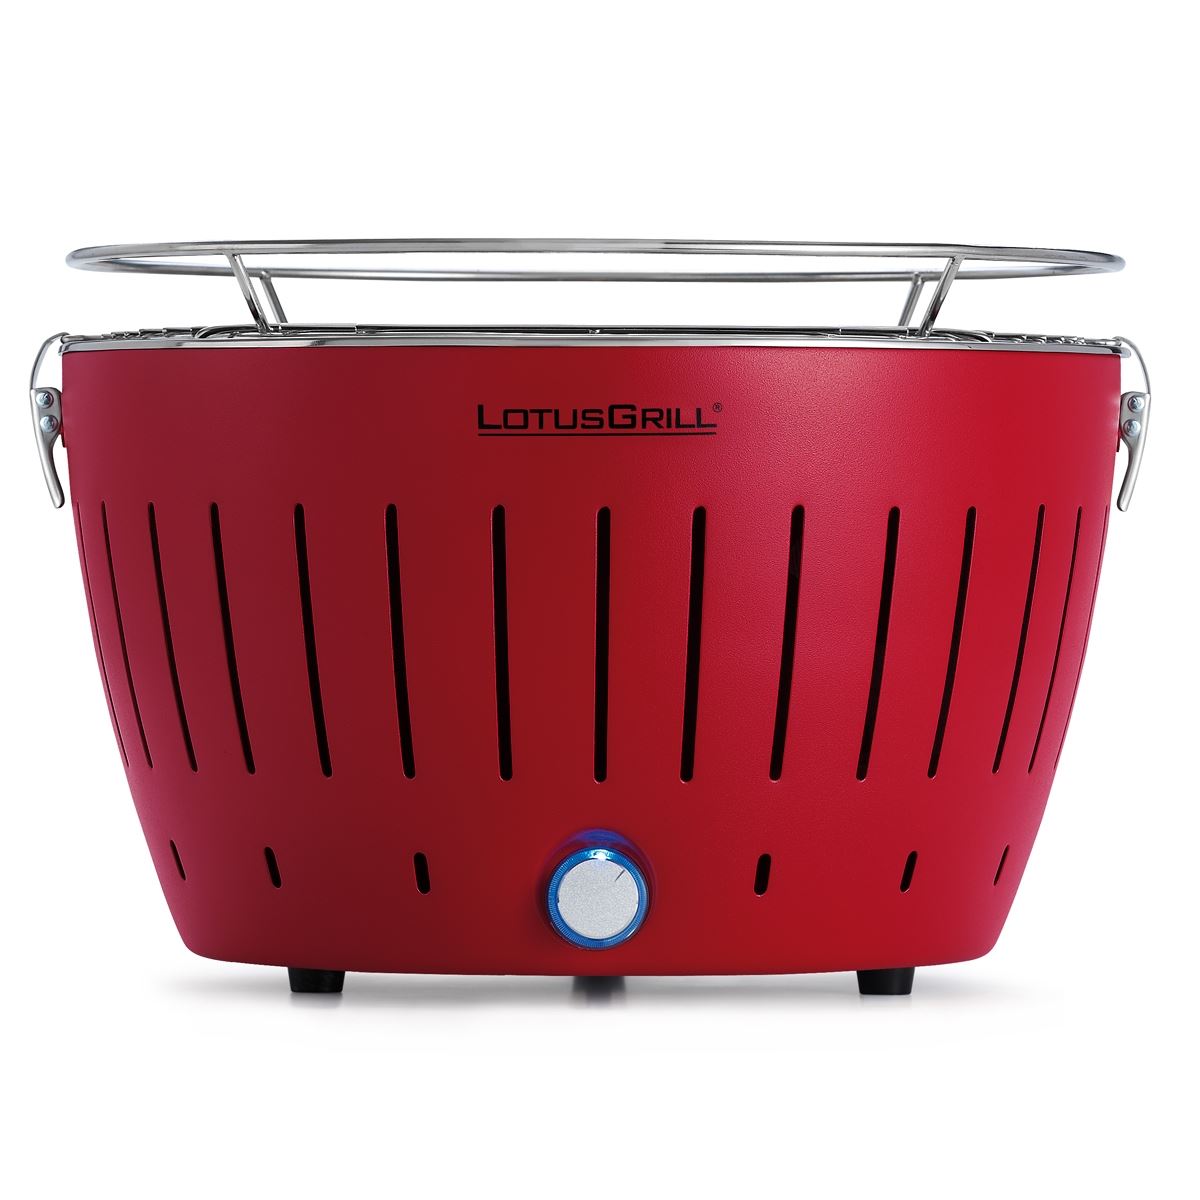 How to light a LotusGrill?